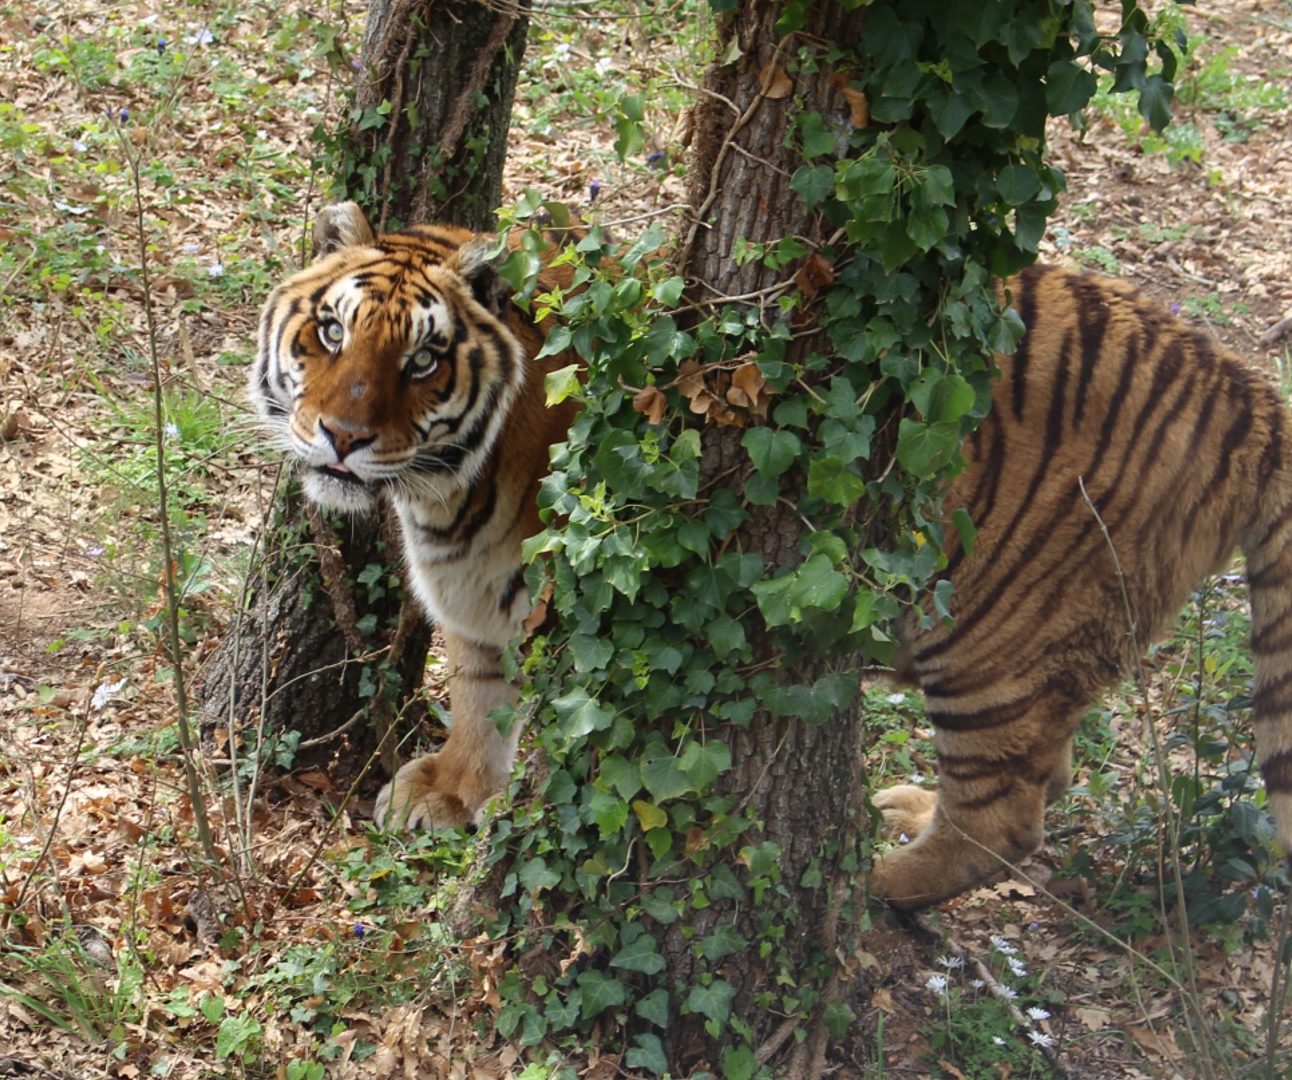 A tiger standing in between two trees looking up at the camera